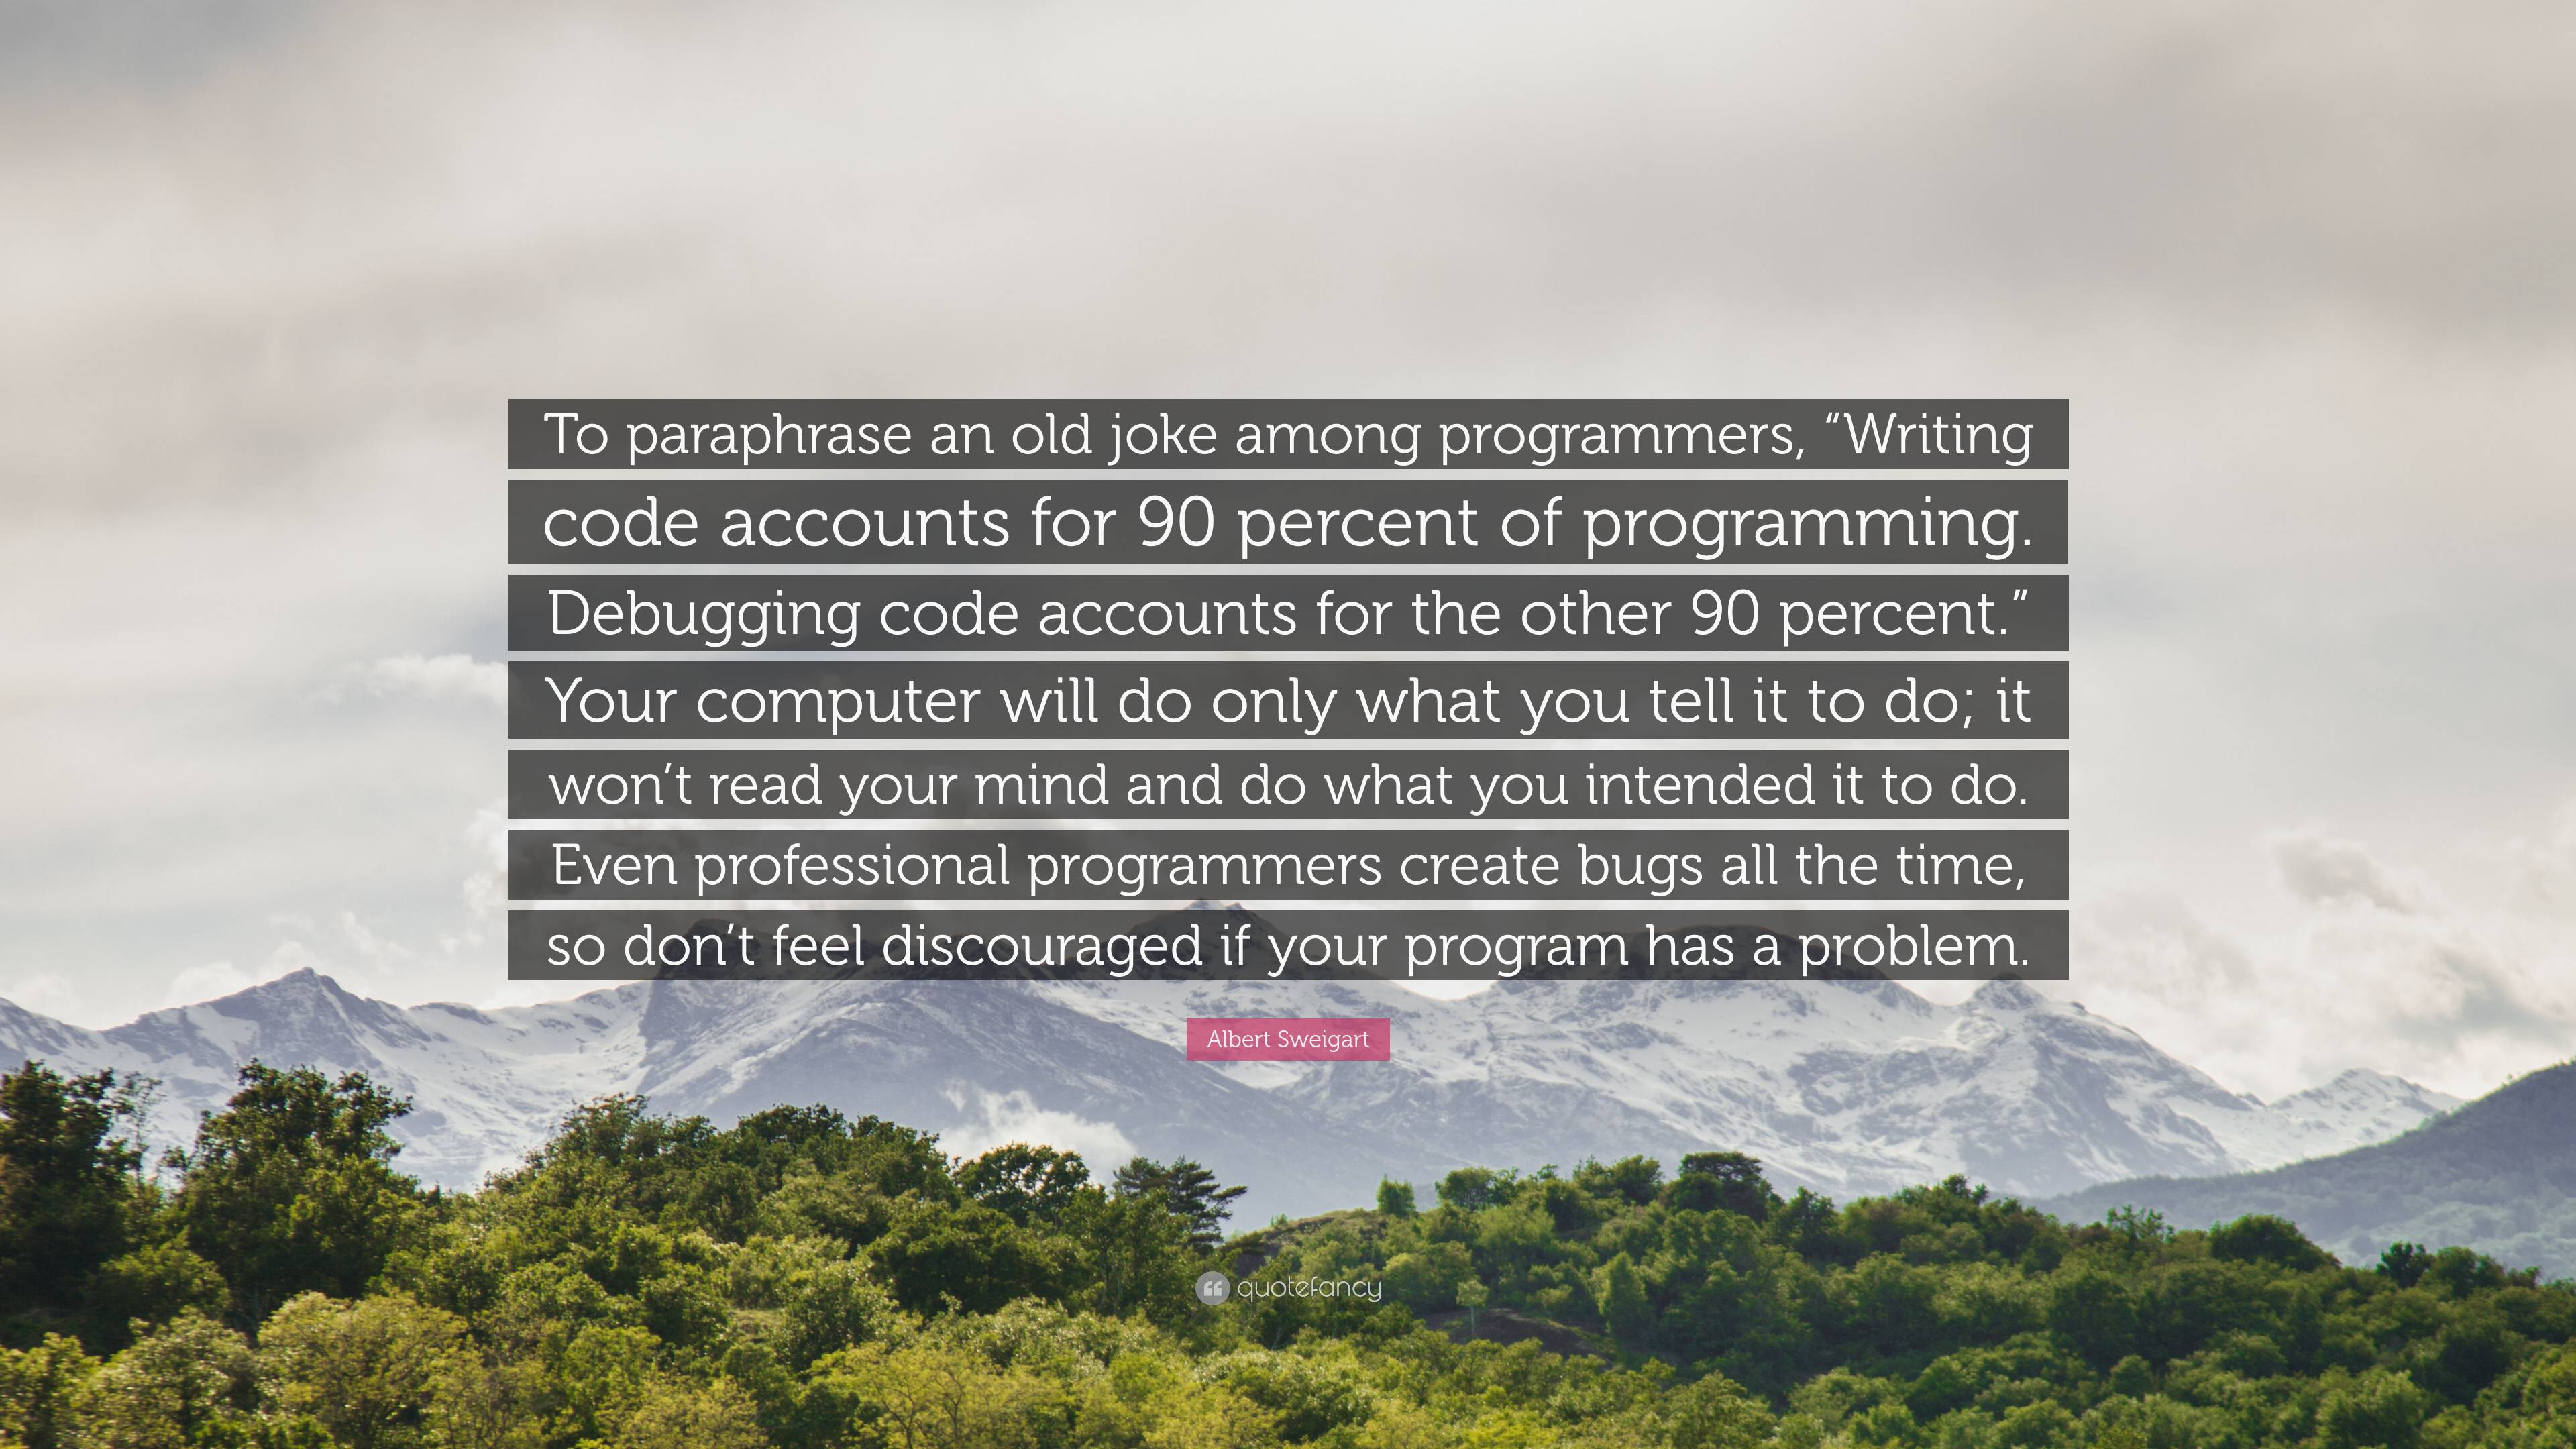 Programmer's Wallpaper Collection  Coding quotes, Coding, Programming humor